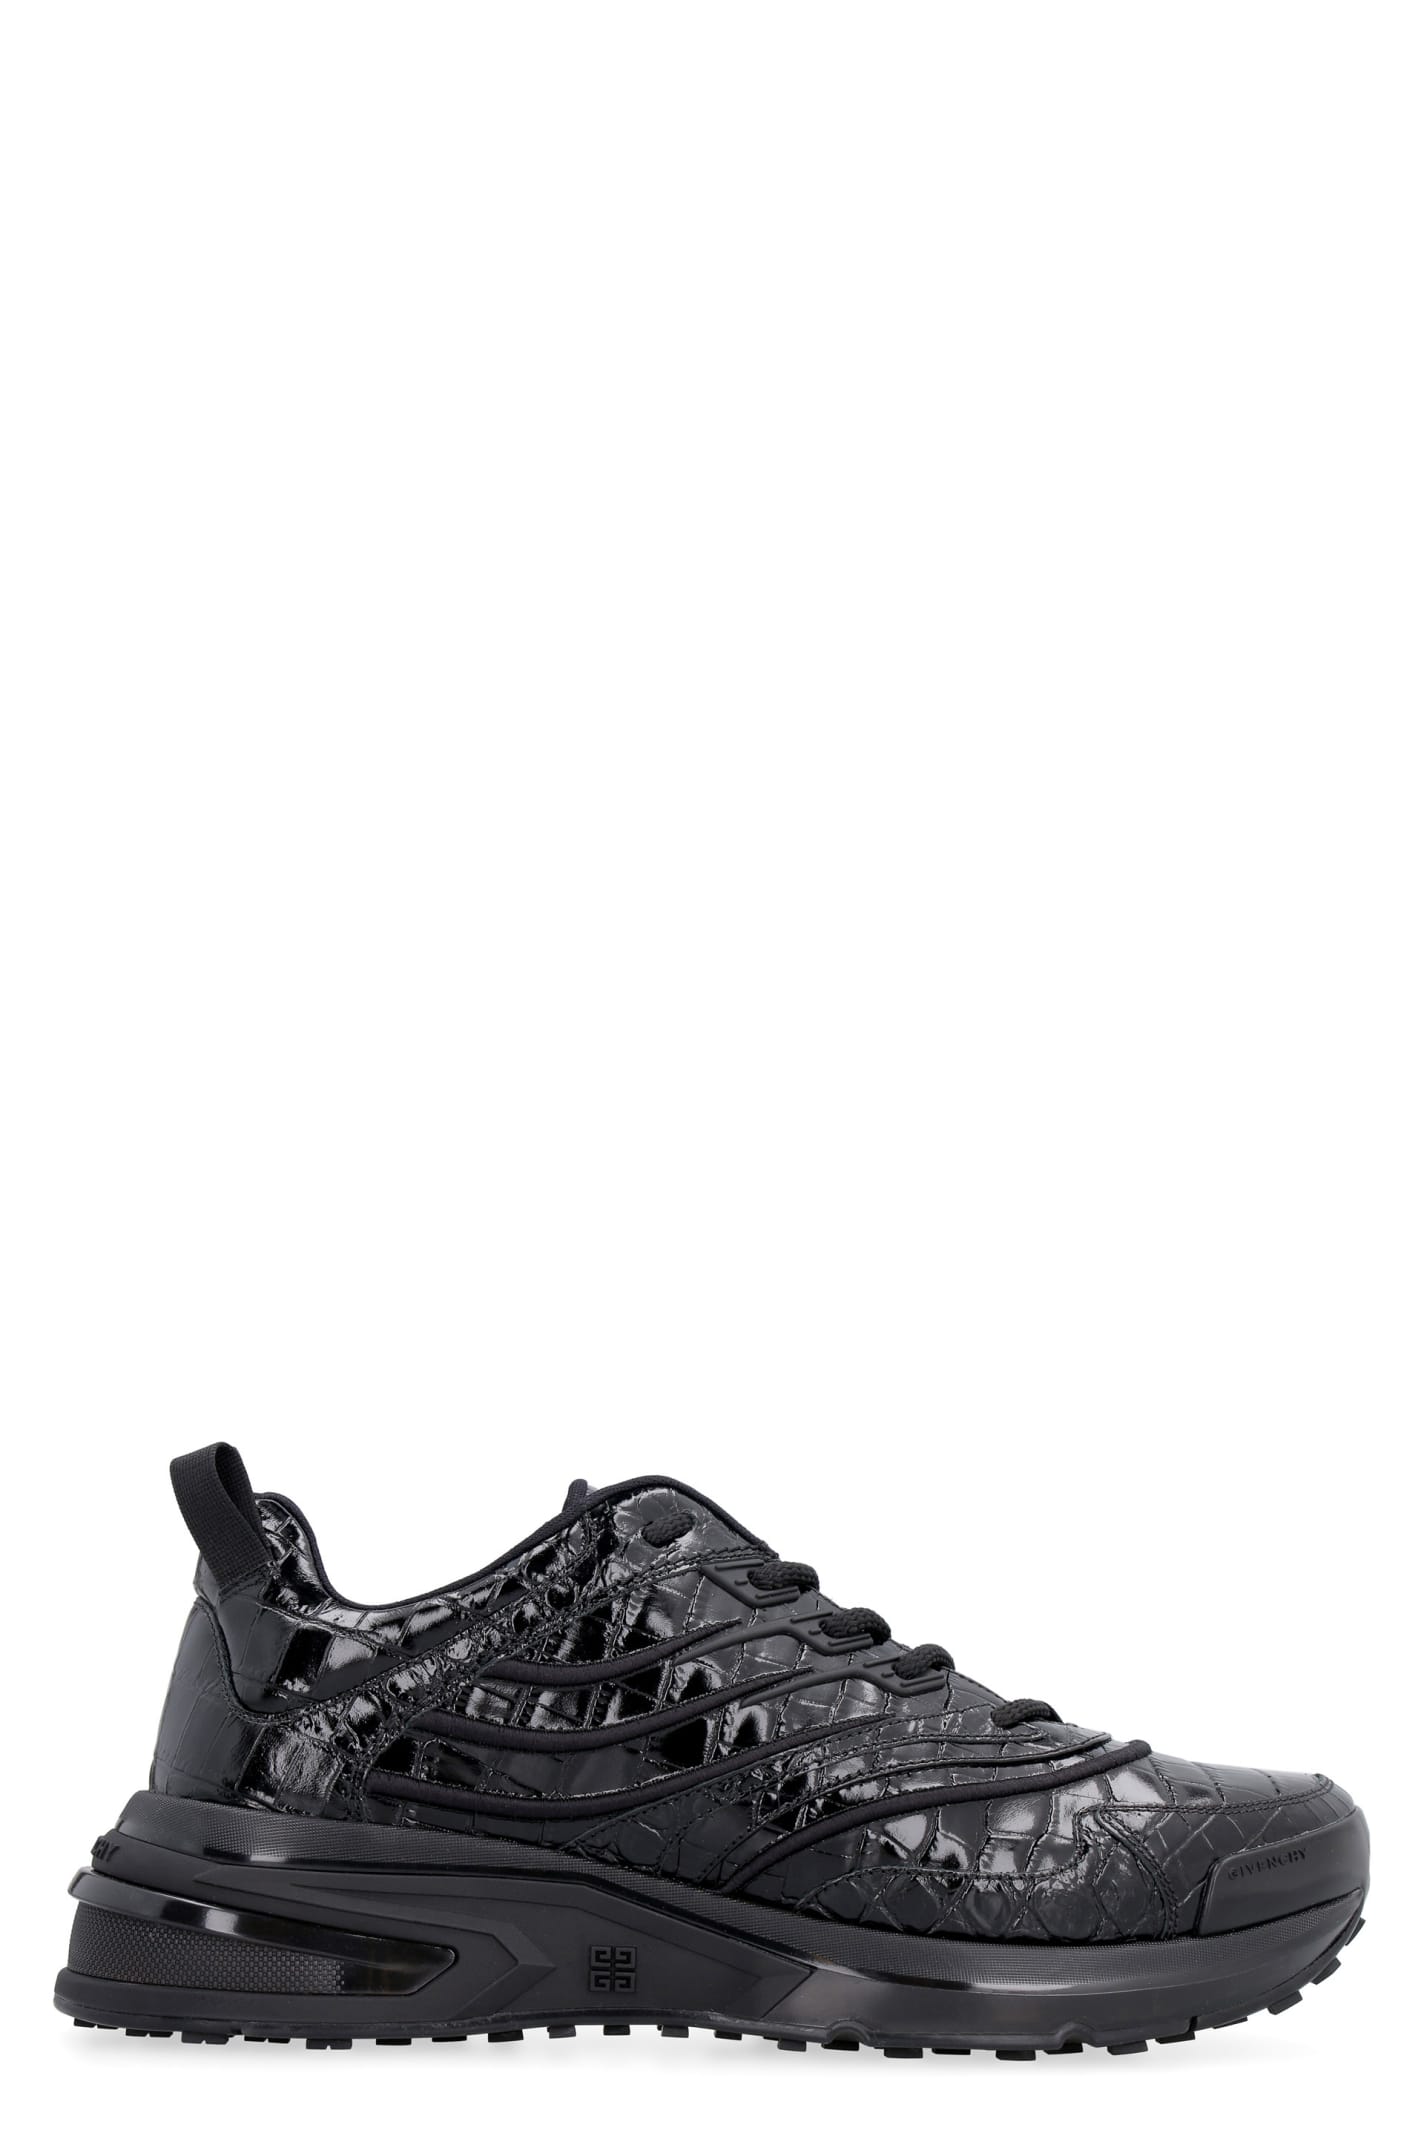 Givenchy Giv 1 Printed Leather Sneakers